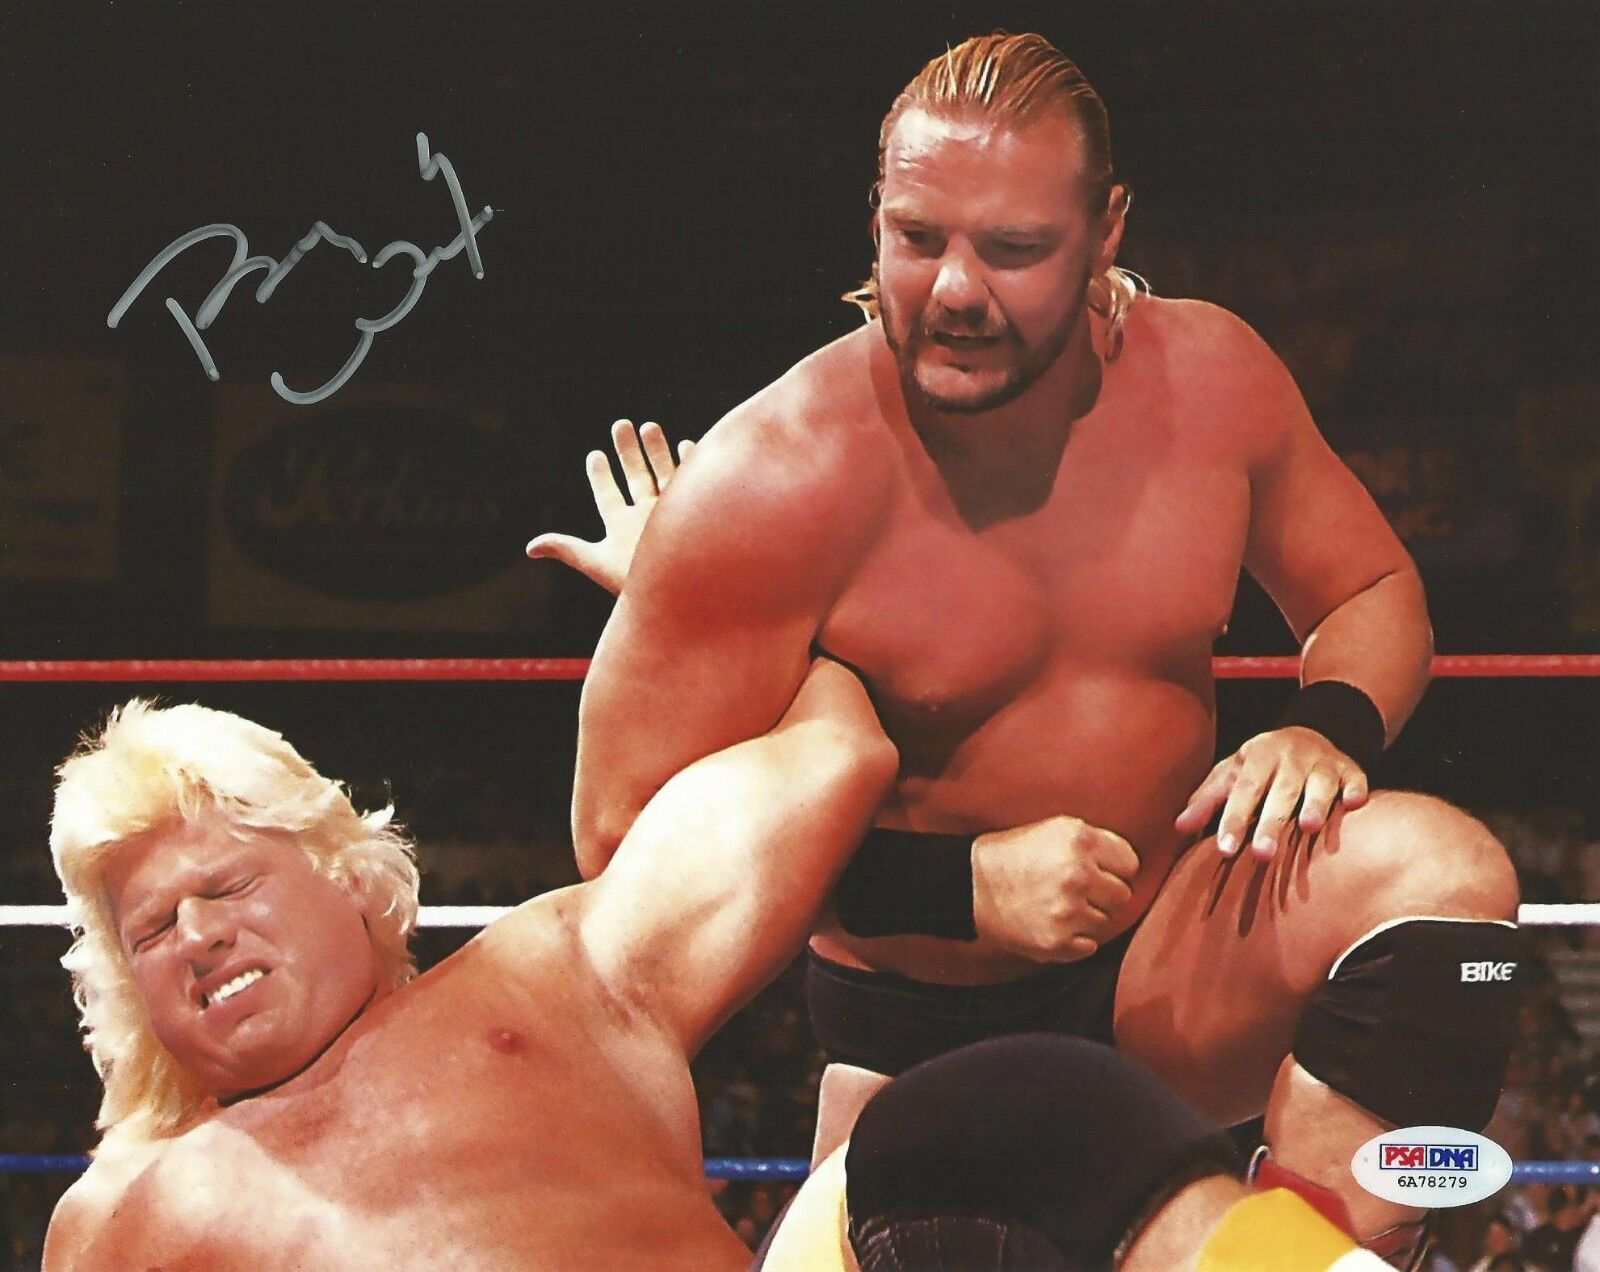 Barry Windham Signed WWE 8x10 Photo Poster painting PSA/DNA COA WCW NWA 4 Four Horsemen Auto'd